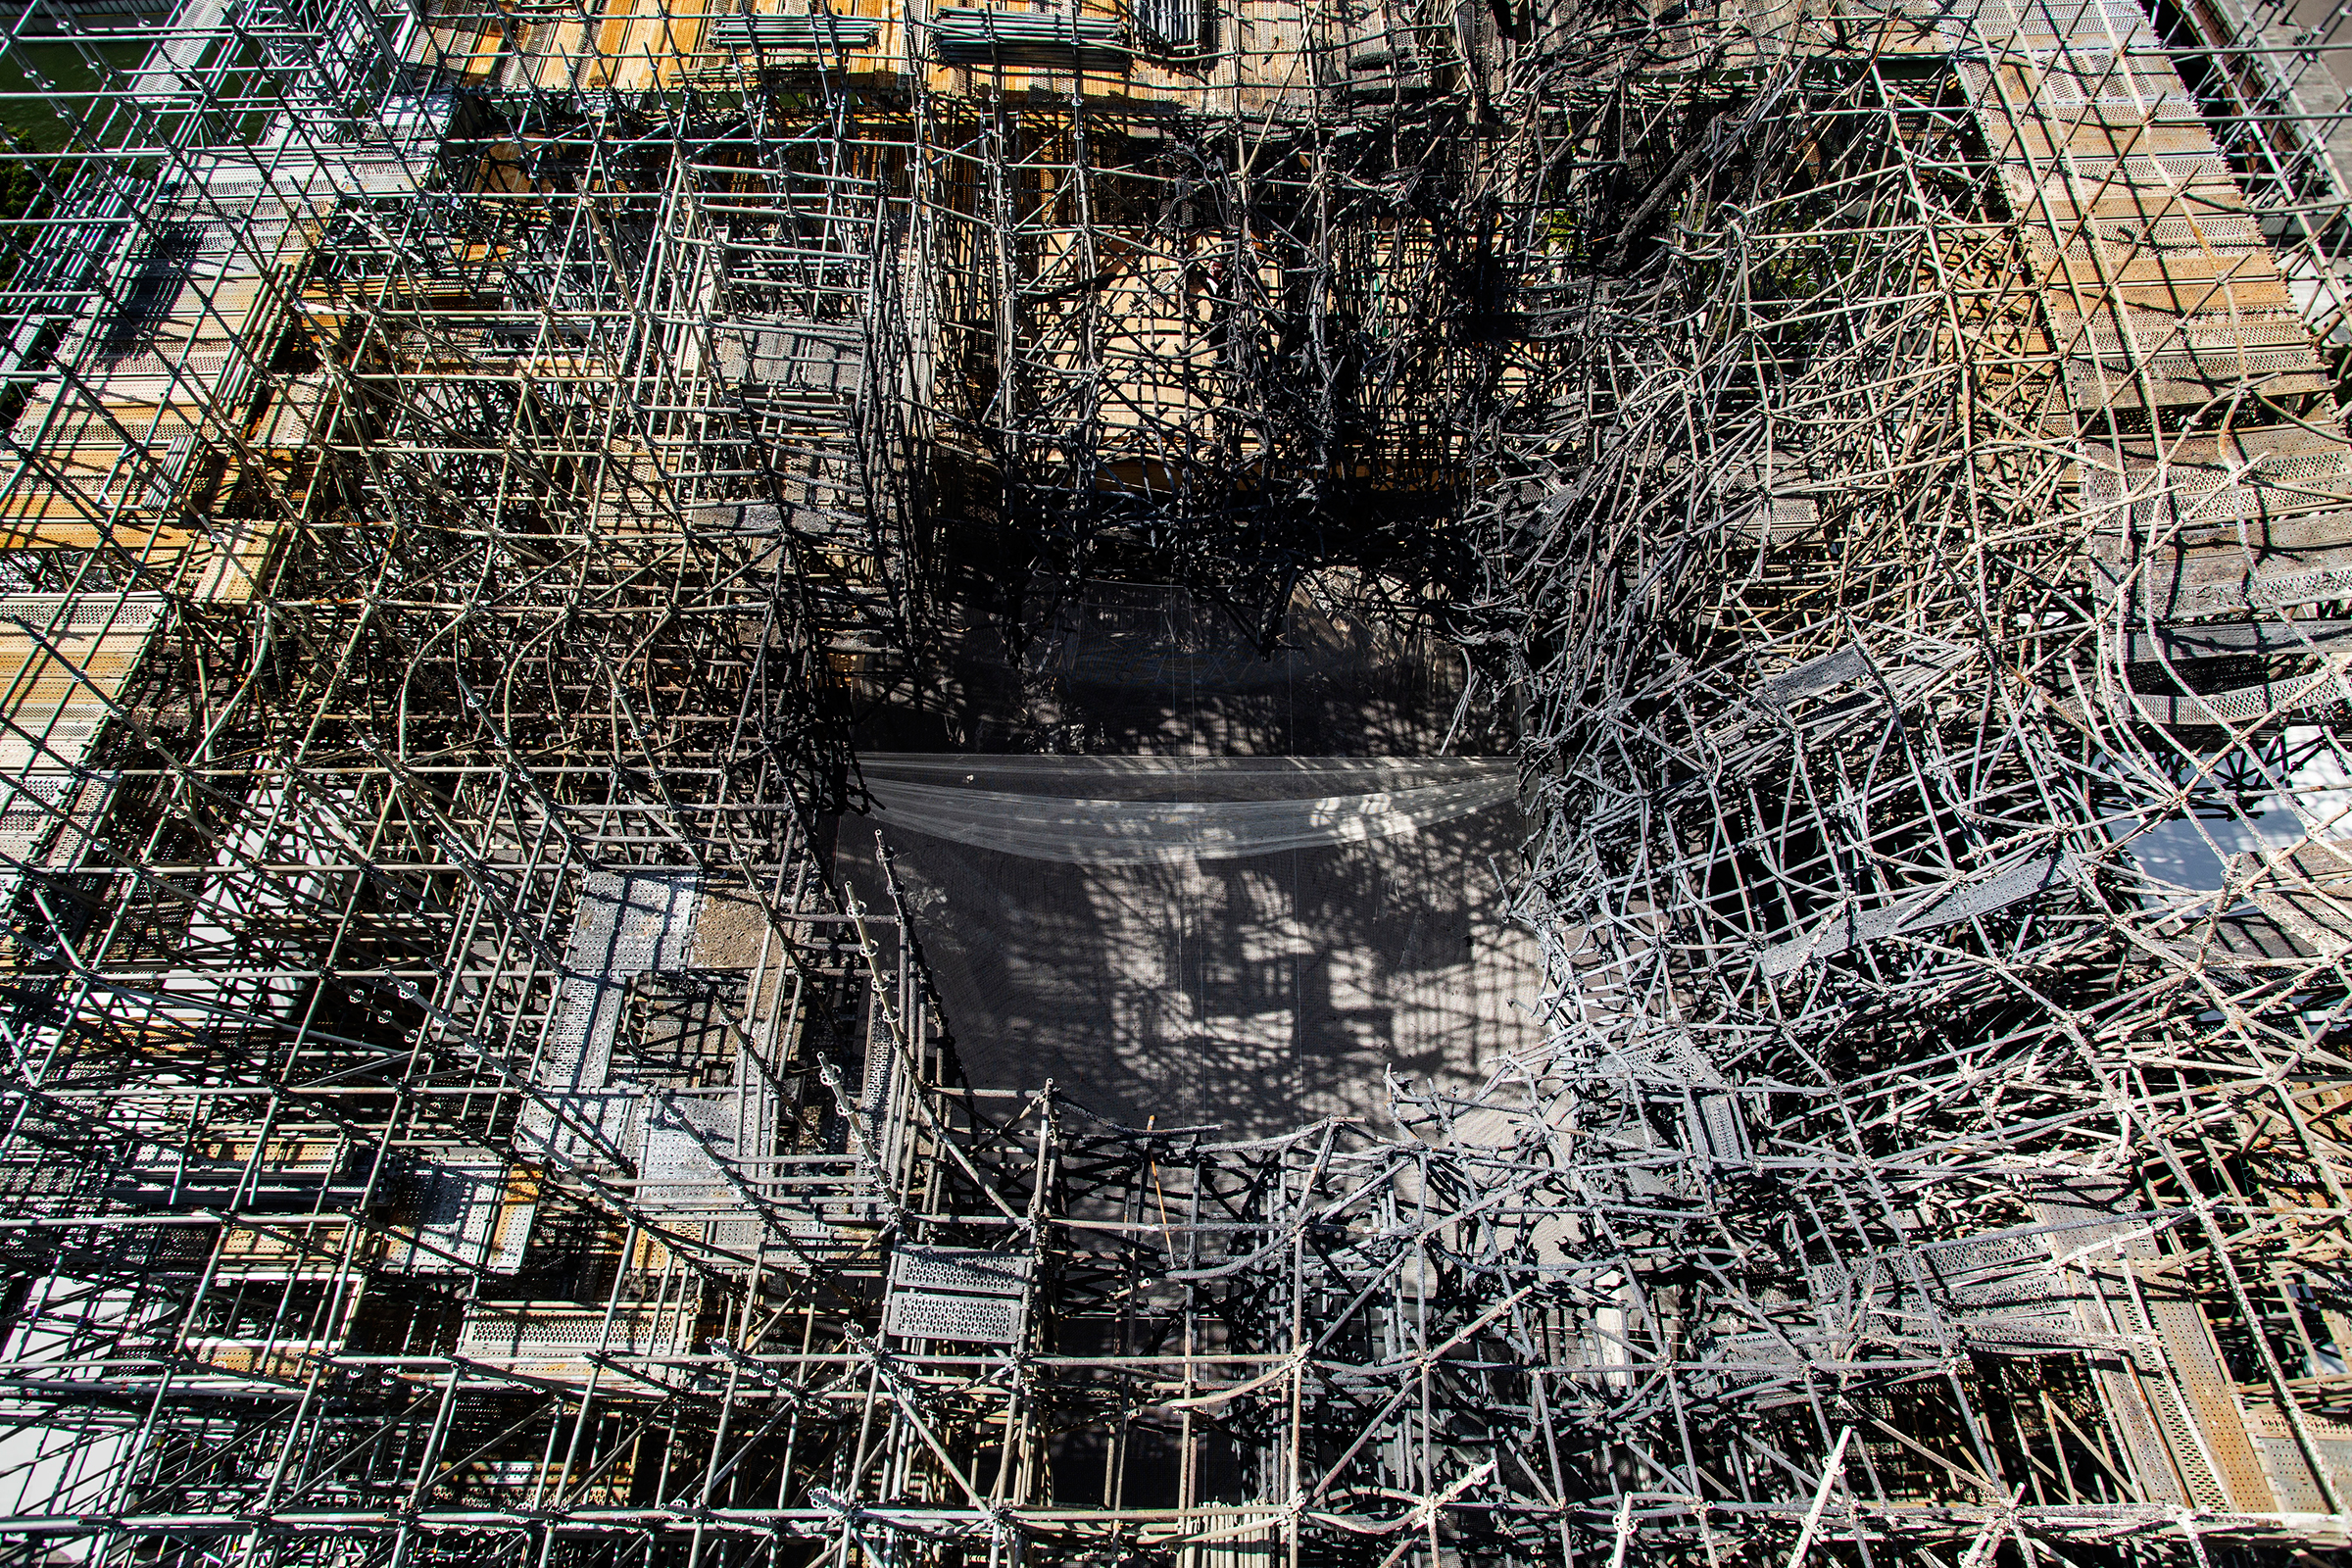 Burnt scaffolding, as seen from above in late July, will be removed. (Patrick Zachmann—Magnum Photos for TIME)